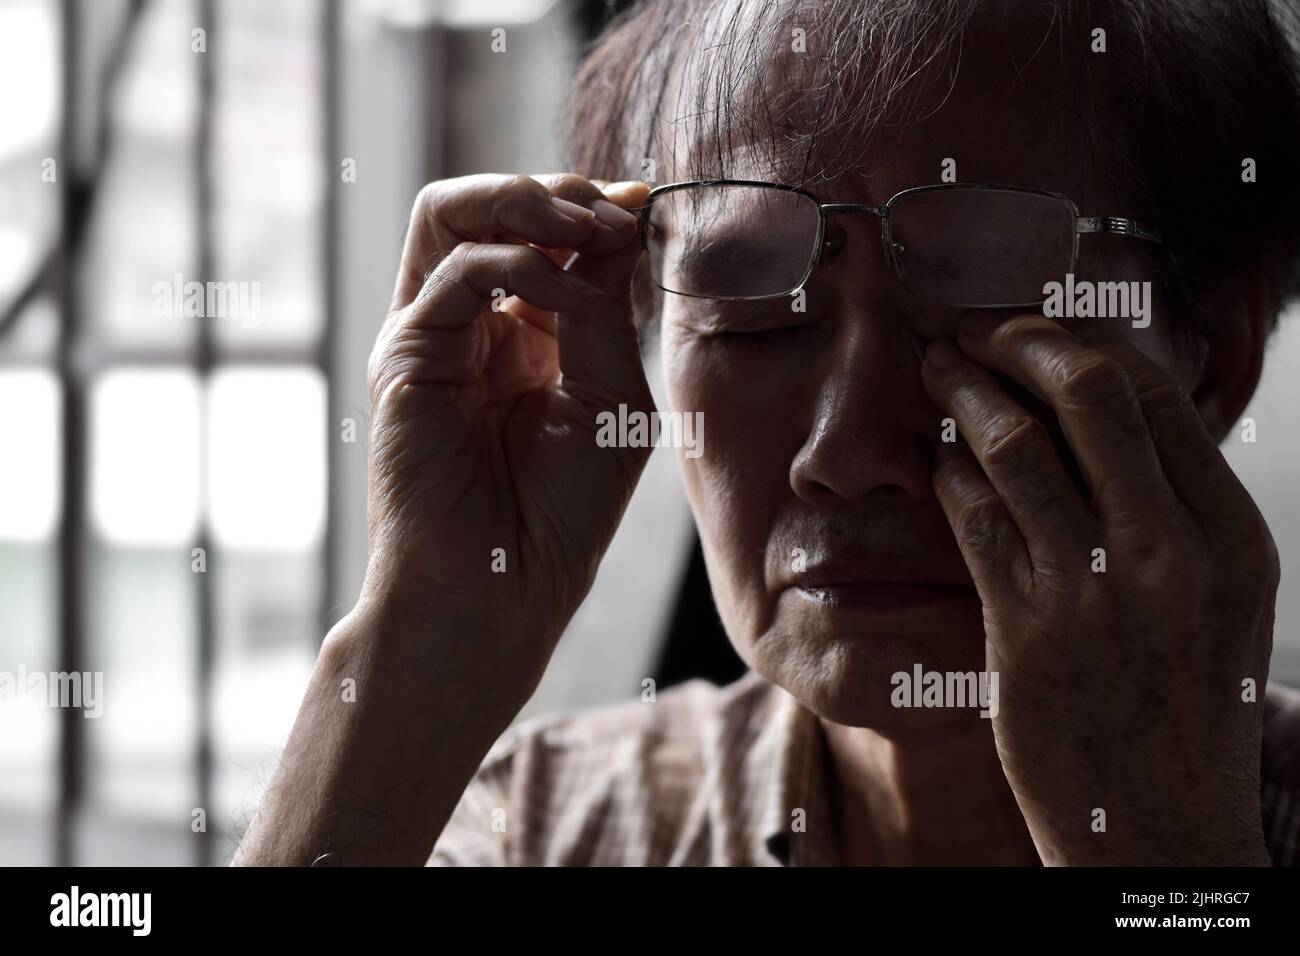 Partial silhouette image of Asian elder man rubbing his eye. Concept of eye pain, strain or itchy eyelid. Stock Photo